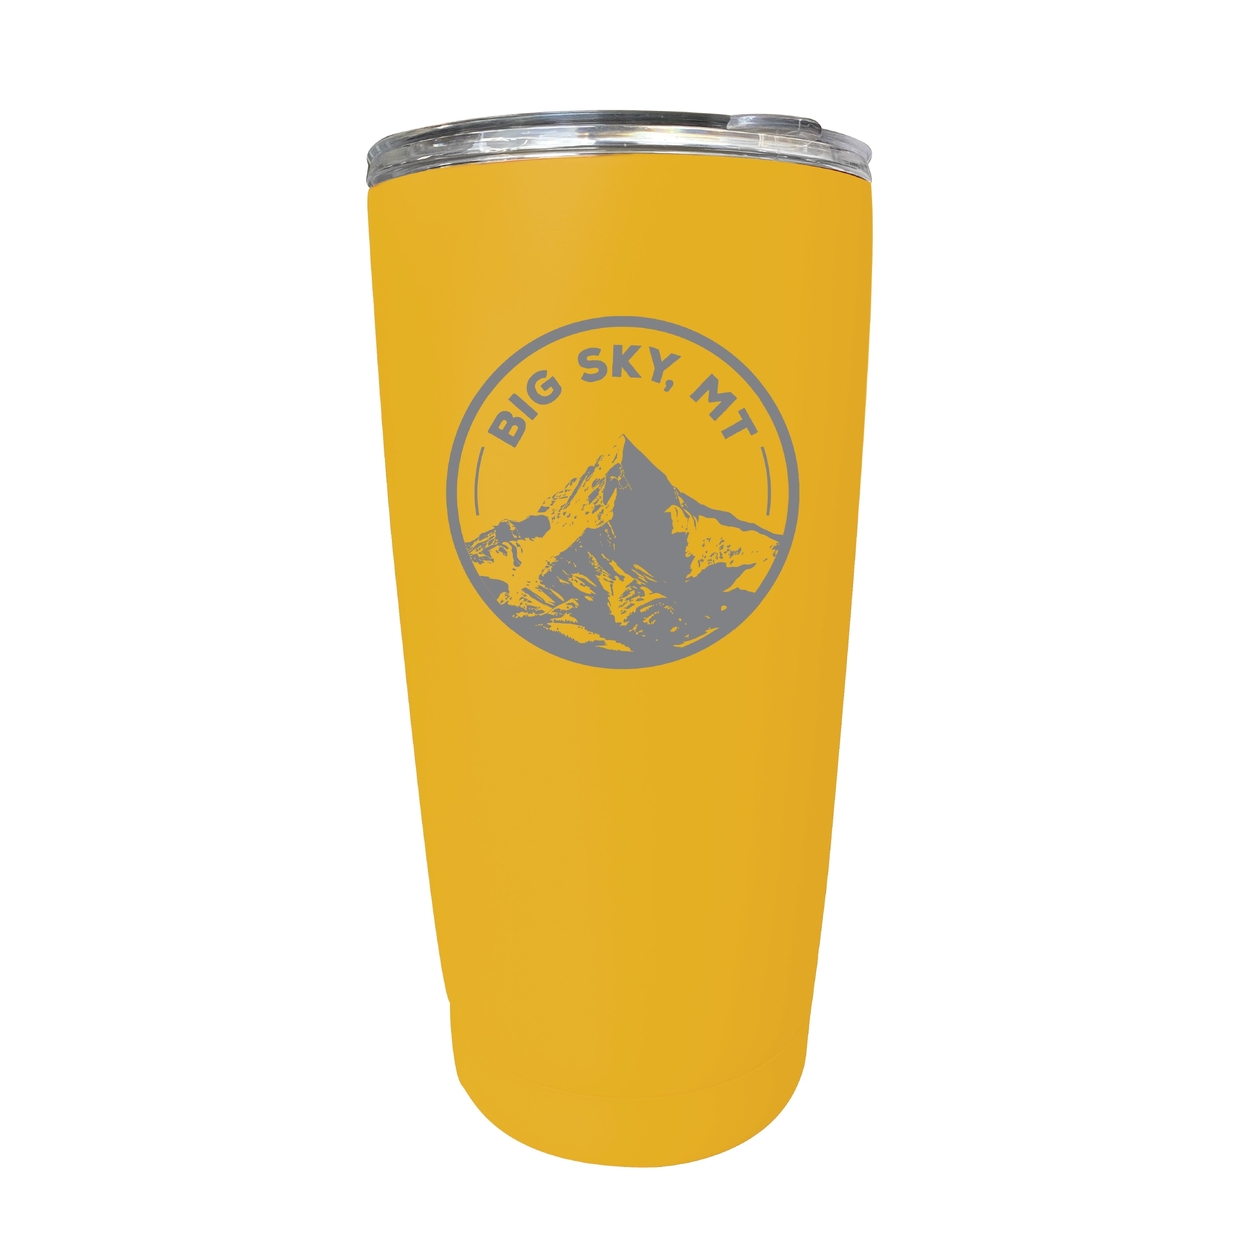 Big Sky Montana Souvenir 16 Oz Engraved Stainless Steel Insulated Tumbler - Yellow,,4-Pack